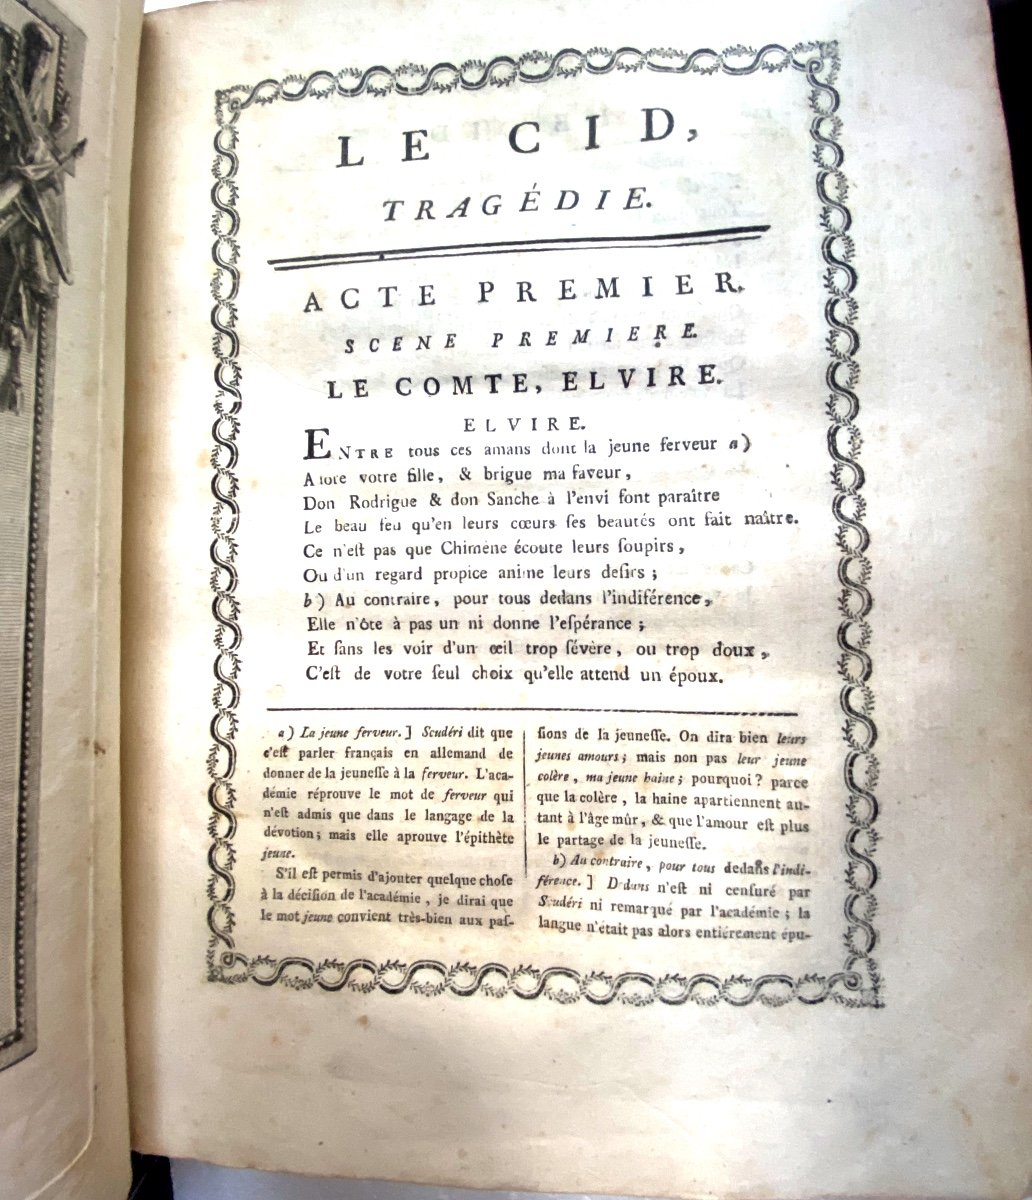 Splendid Edition Of The Theater By P. Corneille In 8 Volumes In 4 In Illustrated Tortoiseshell Glazed Calfskin -photo-4